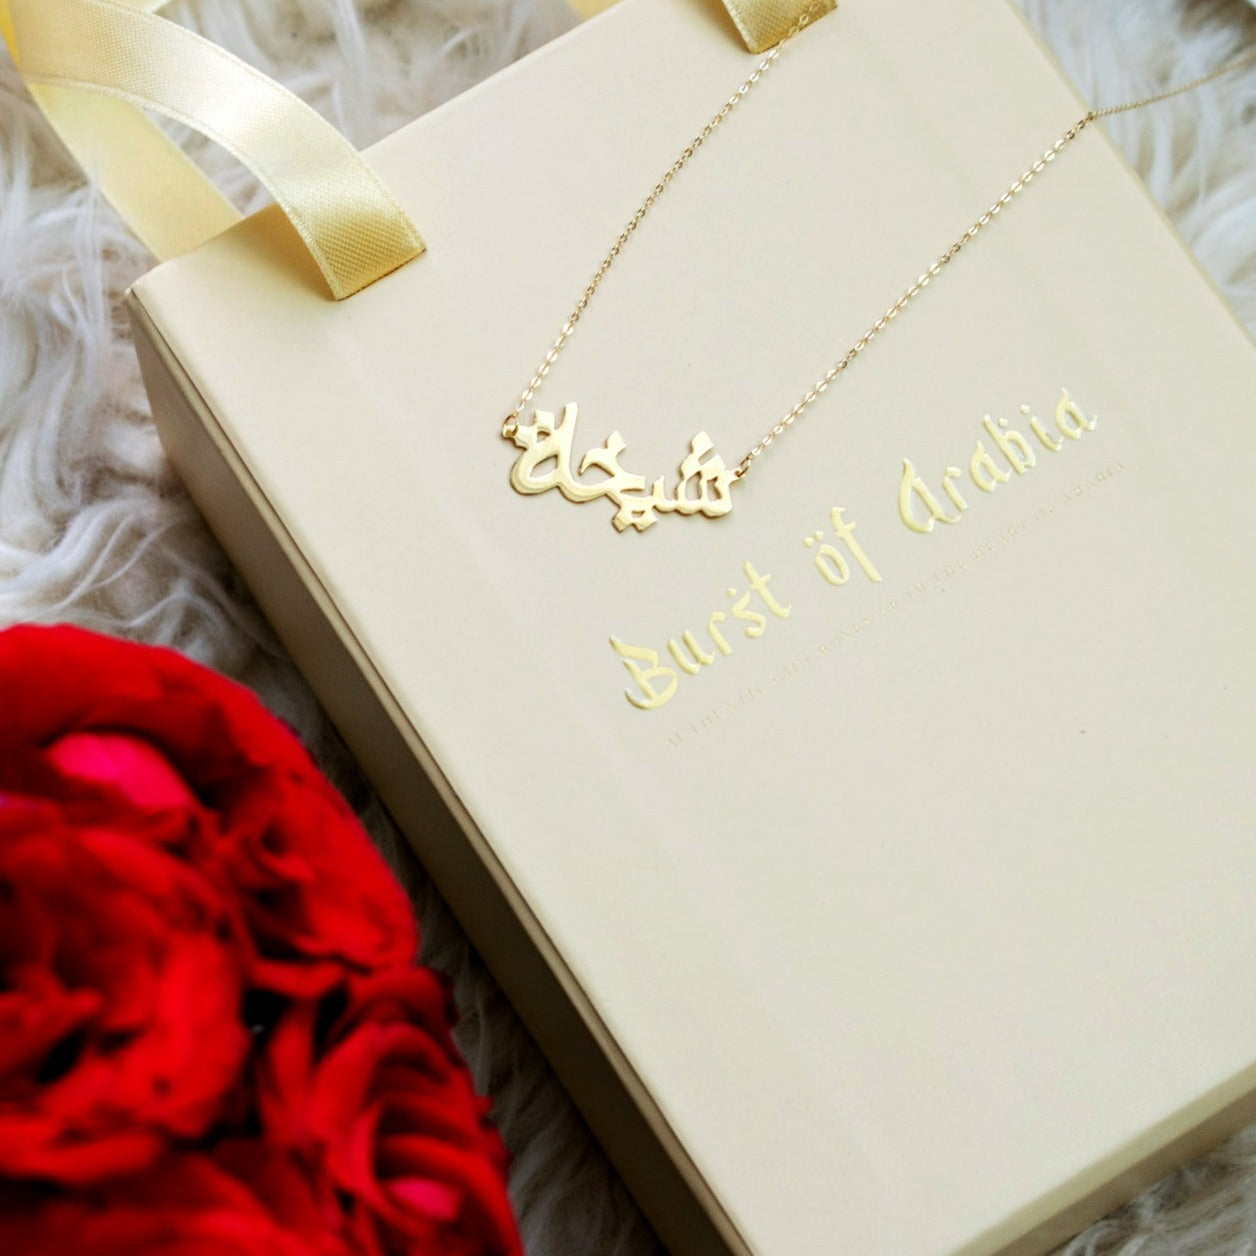 Express your individuality and style with our stunning gold name necklaces. Crafted with precision and personalized just for you, these necklaces are the perfect accessory to showcase your personality.